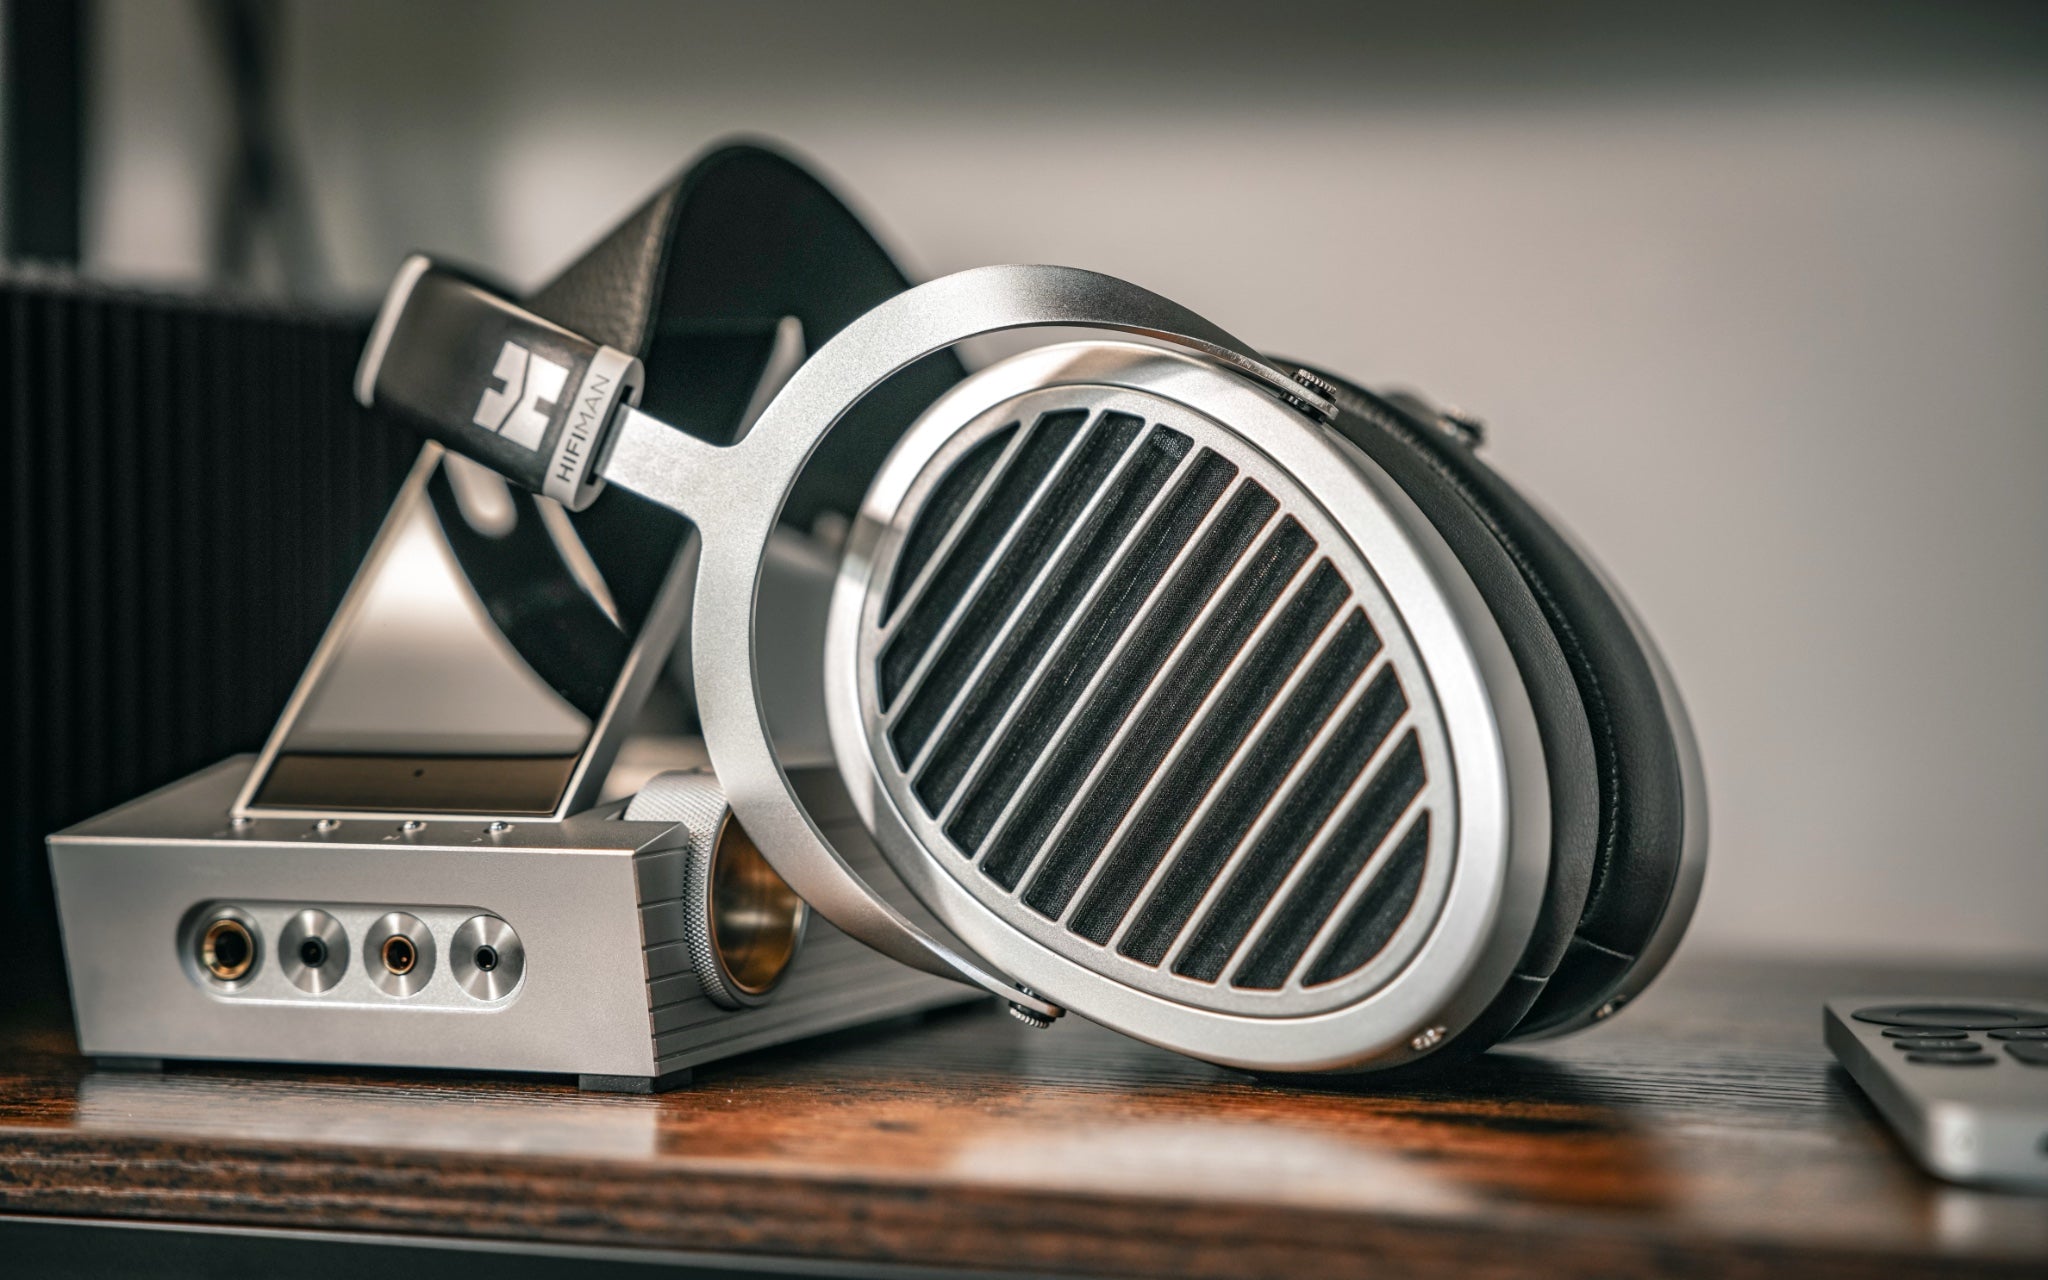 HiFiMAN Ananda Nano headphone leaning against A&K ACRO CA1000 portable amp from Bloom Audio gallery